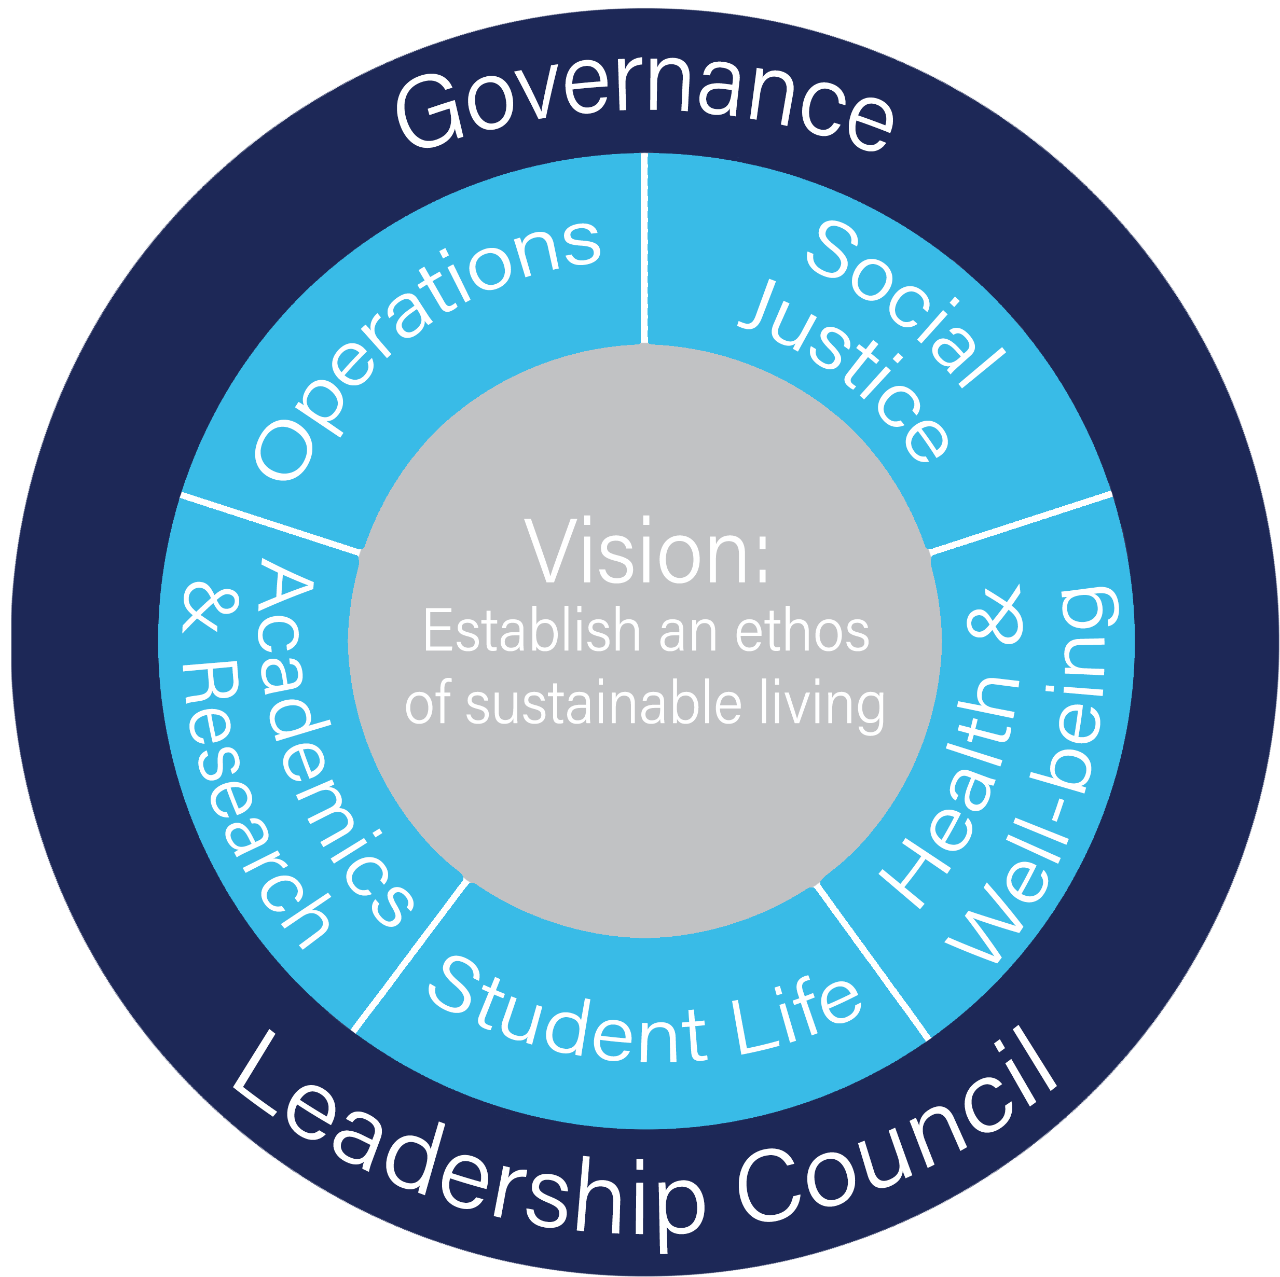 Circle of Villanova Sustainability Leadership Council comprised of 5 teams working towards one vision 'establish an ethos for sustainable living